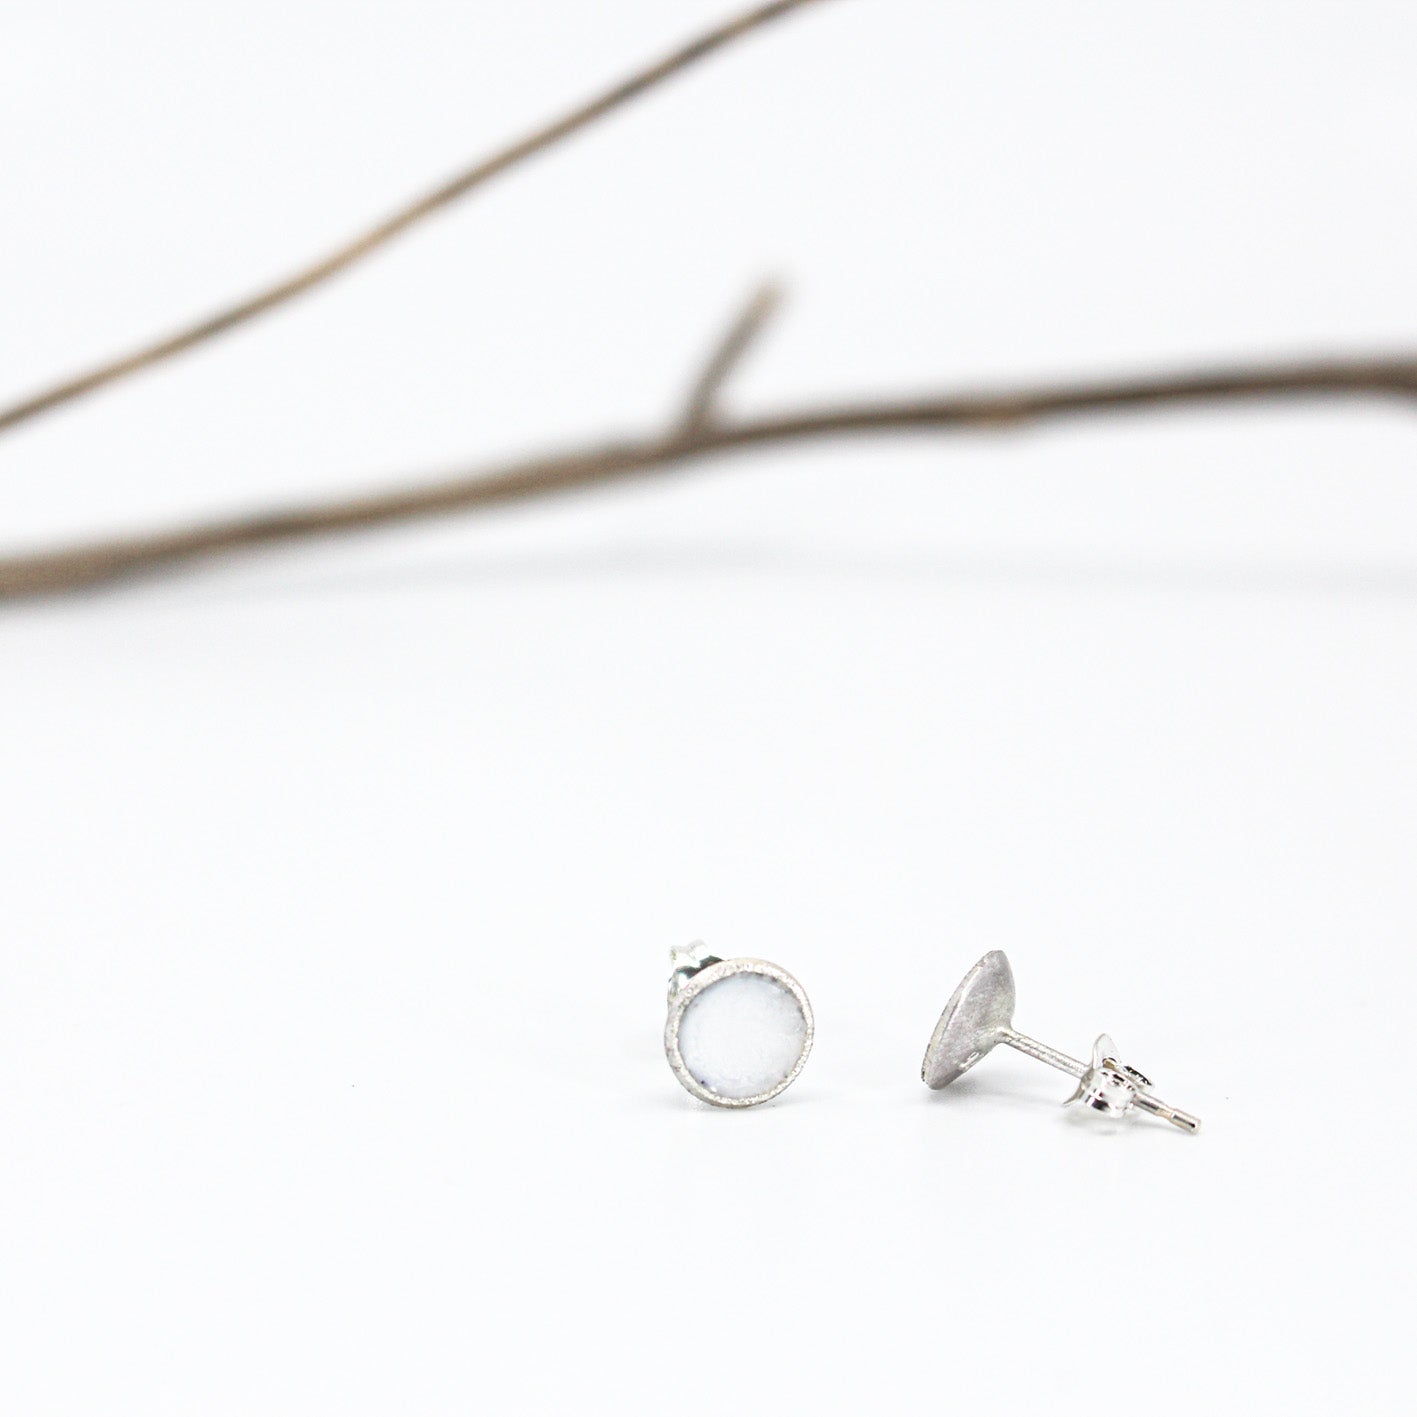 small minimalist round sterling silver stud earrings with white or grey or black resin